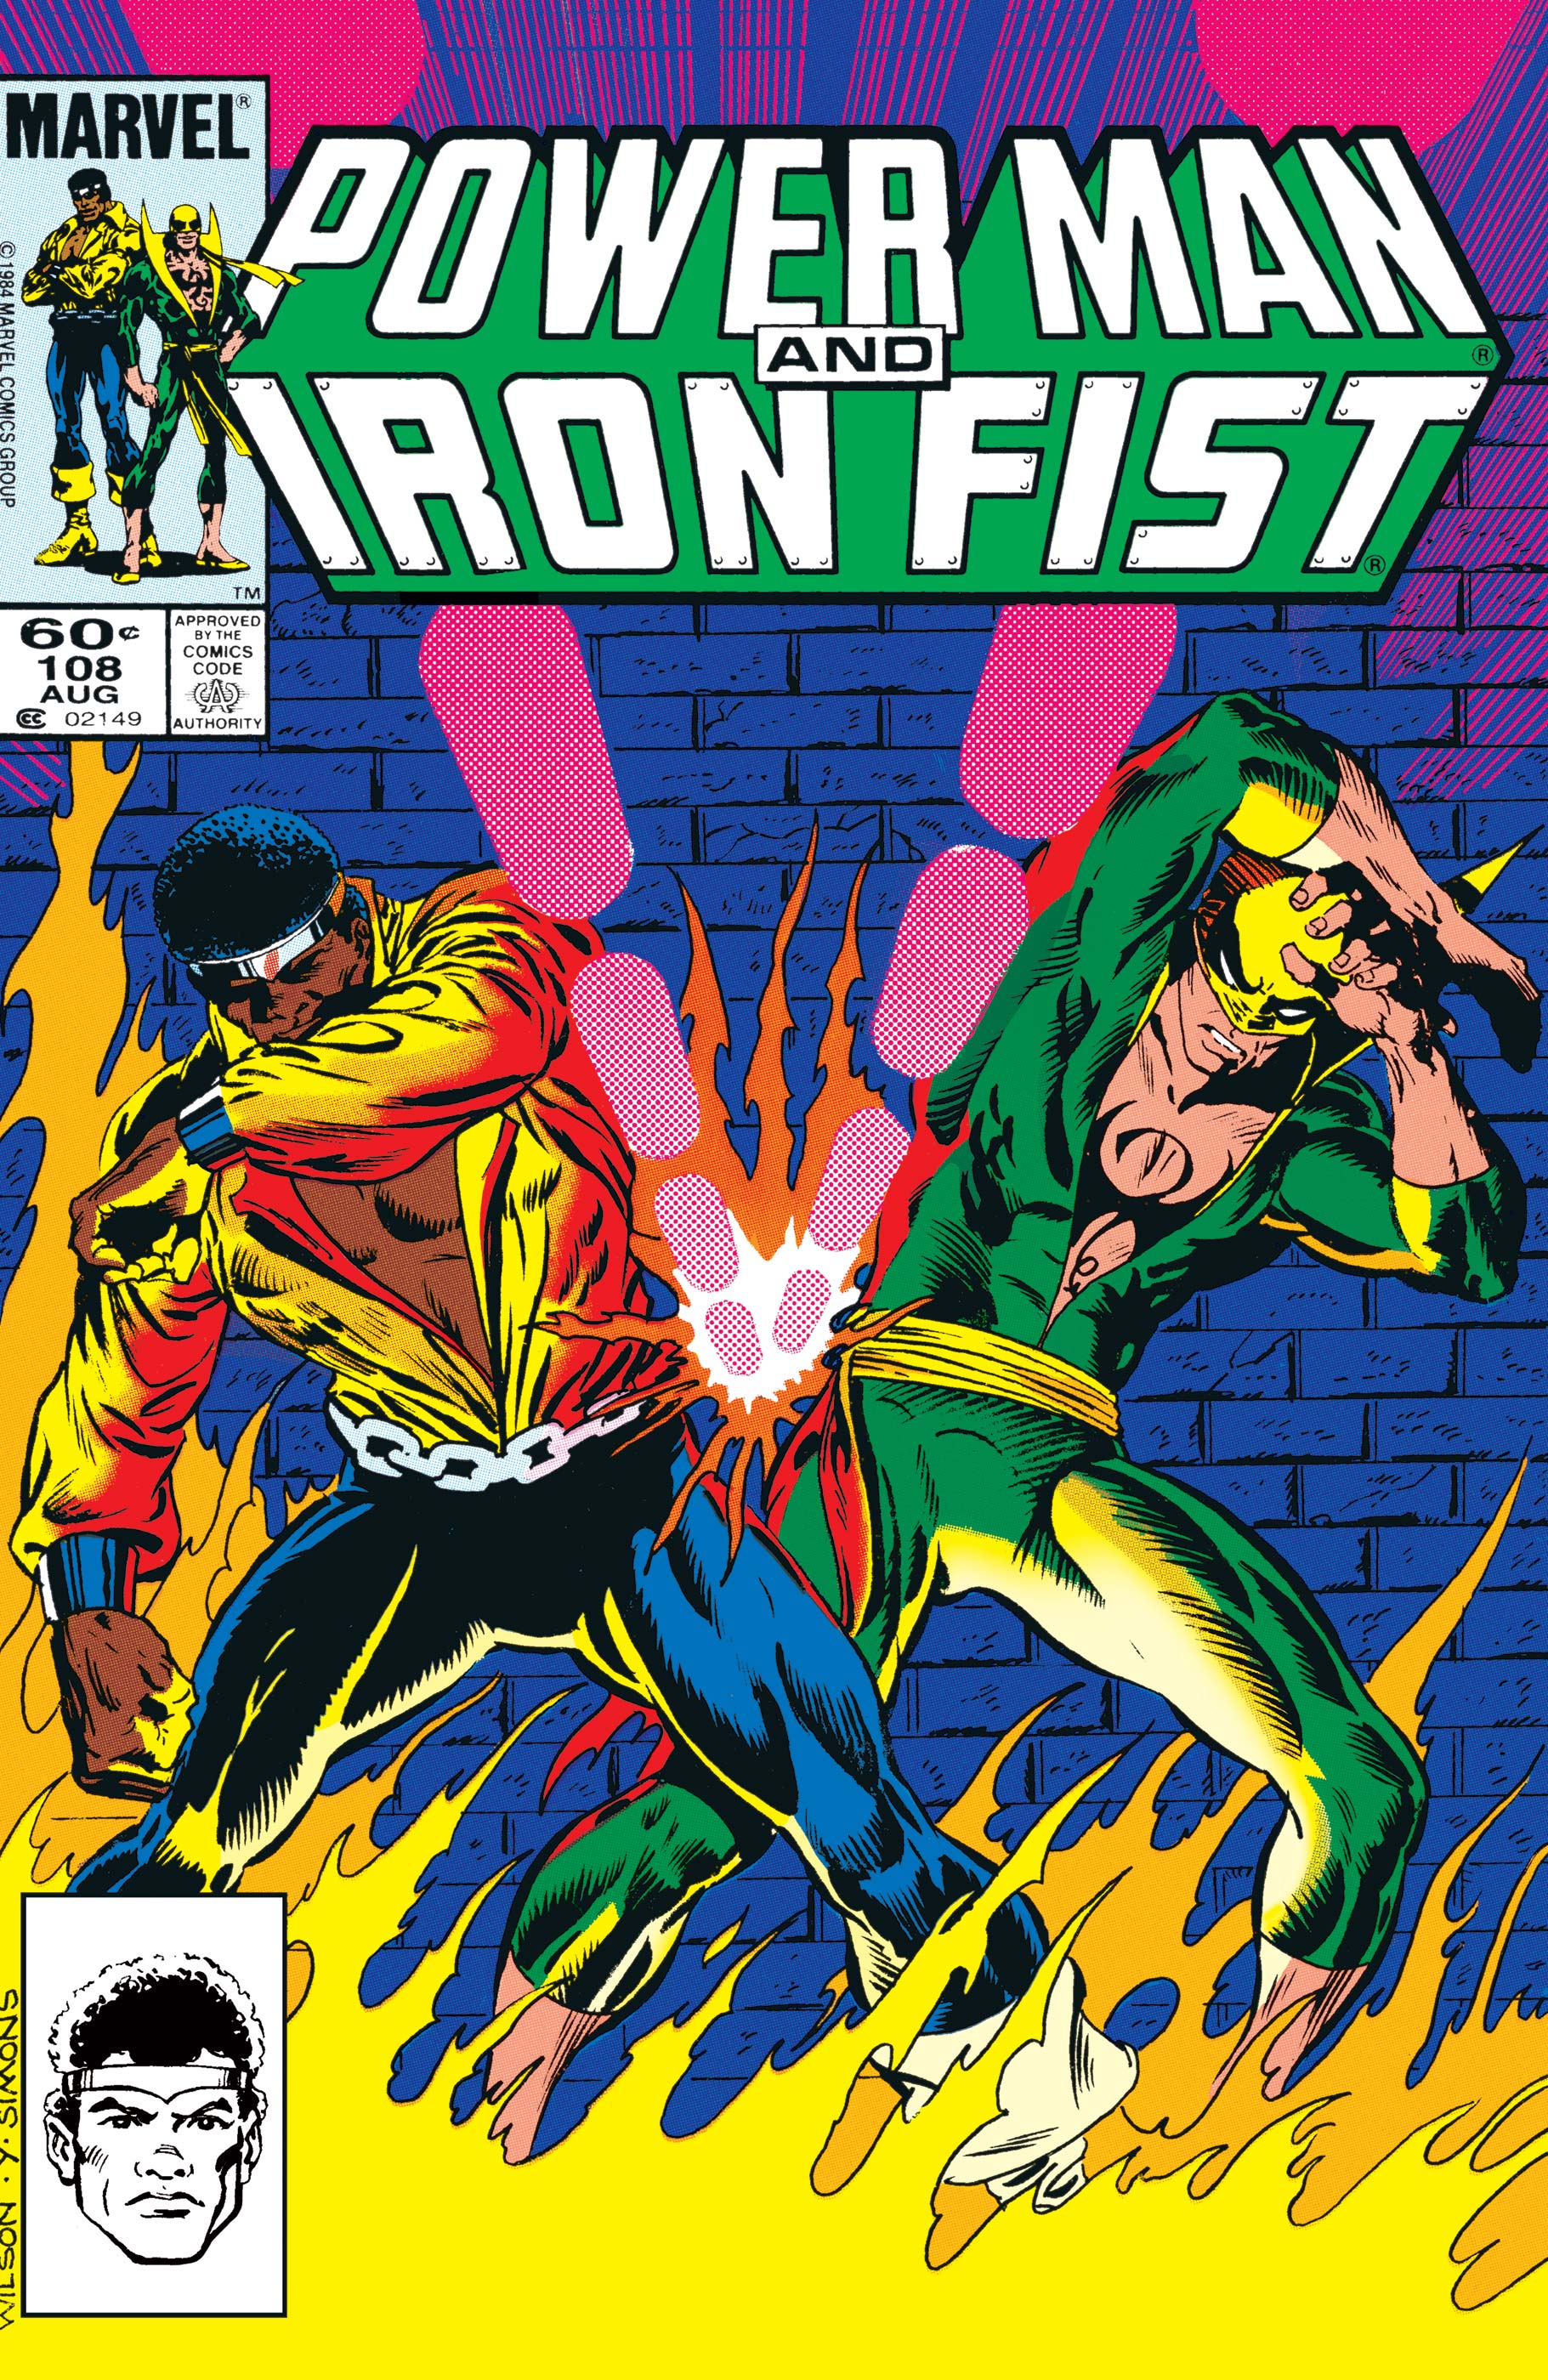 Power Man and Iron Fist (1978) #108